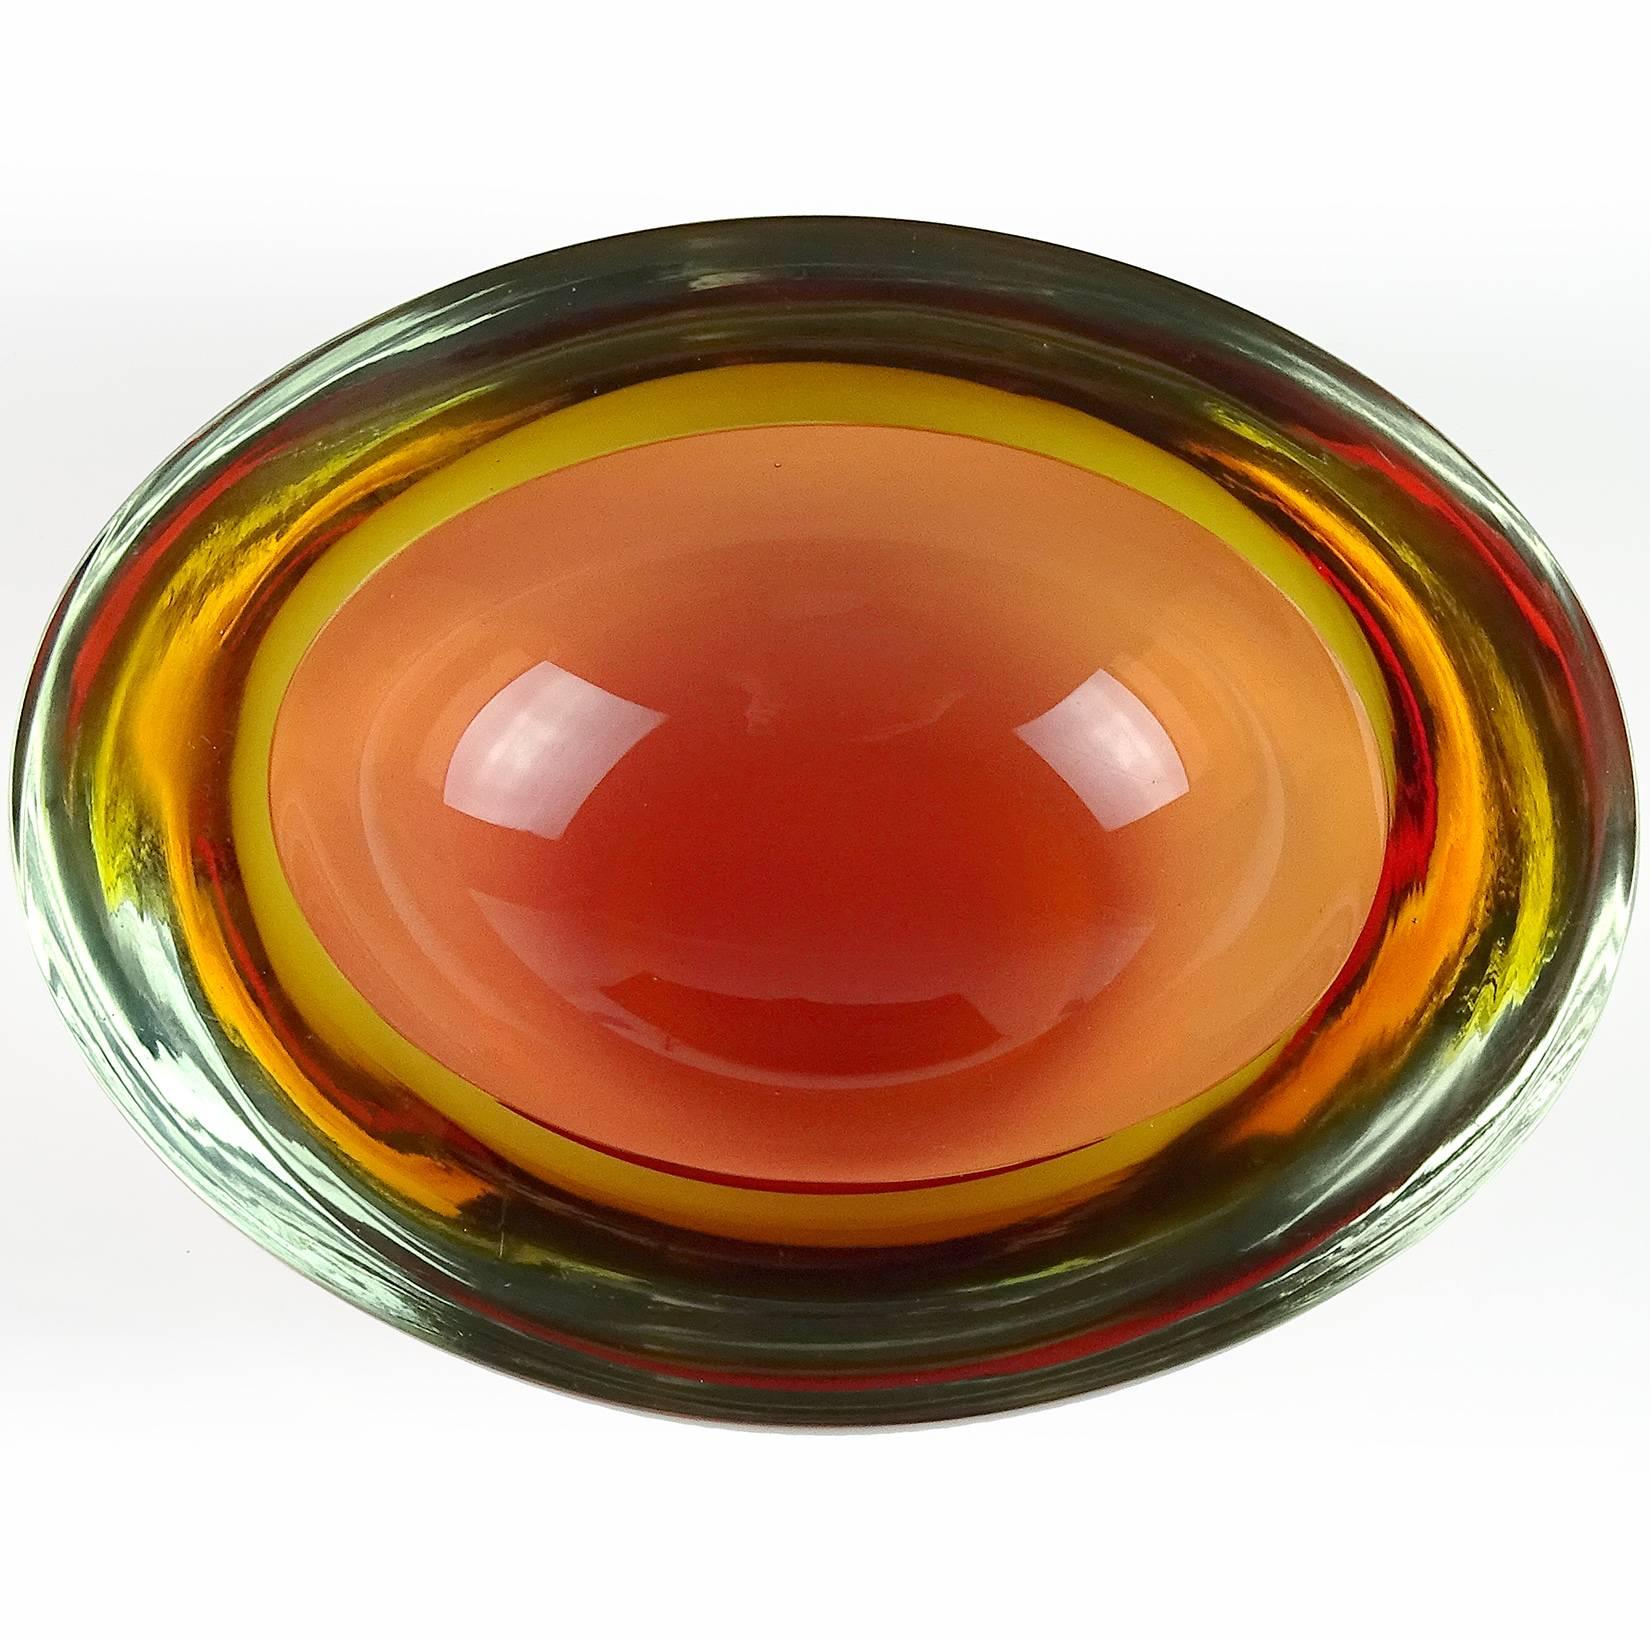 Beautiful Murano handblown Sommerso yellow and peachy orange Italian art glass bowl. Attributed to designer Flavio Poli, for the Seguso Vetri d'Arte company. The piece is very thick and heavy, with an oval shape and flat cut rim. Measures 6 3/4”